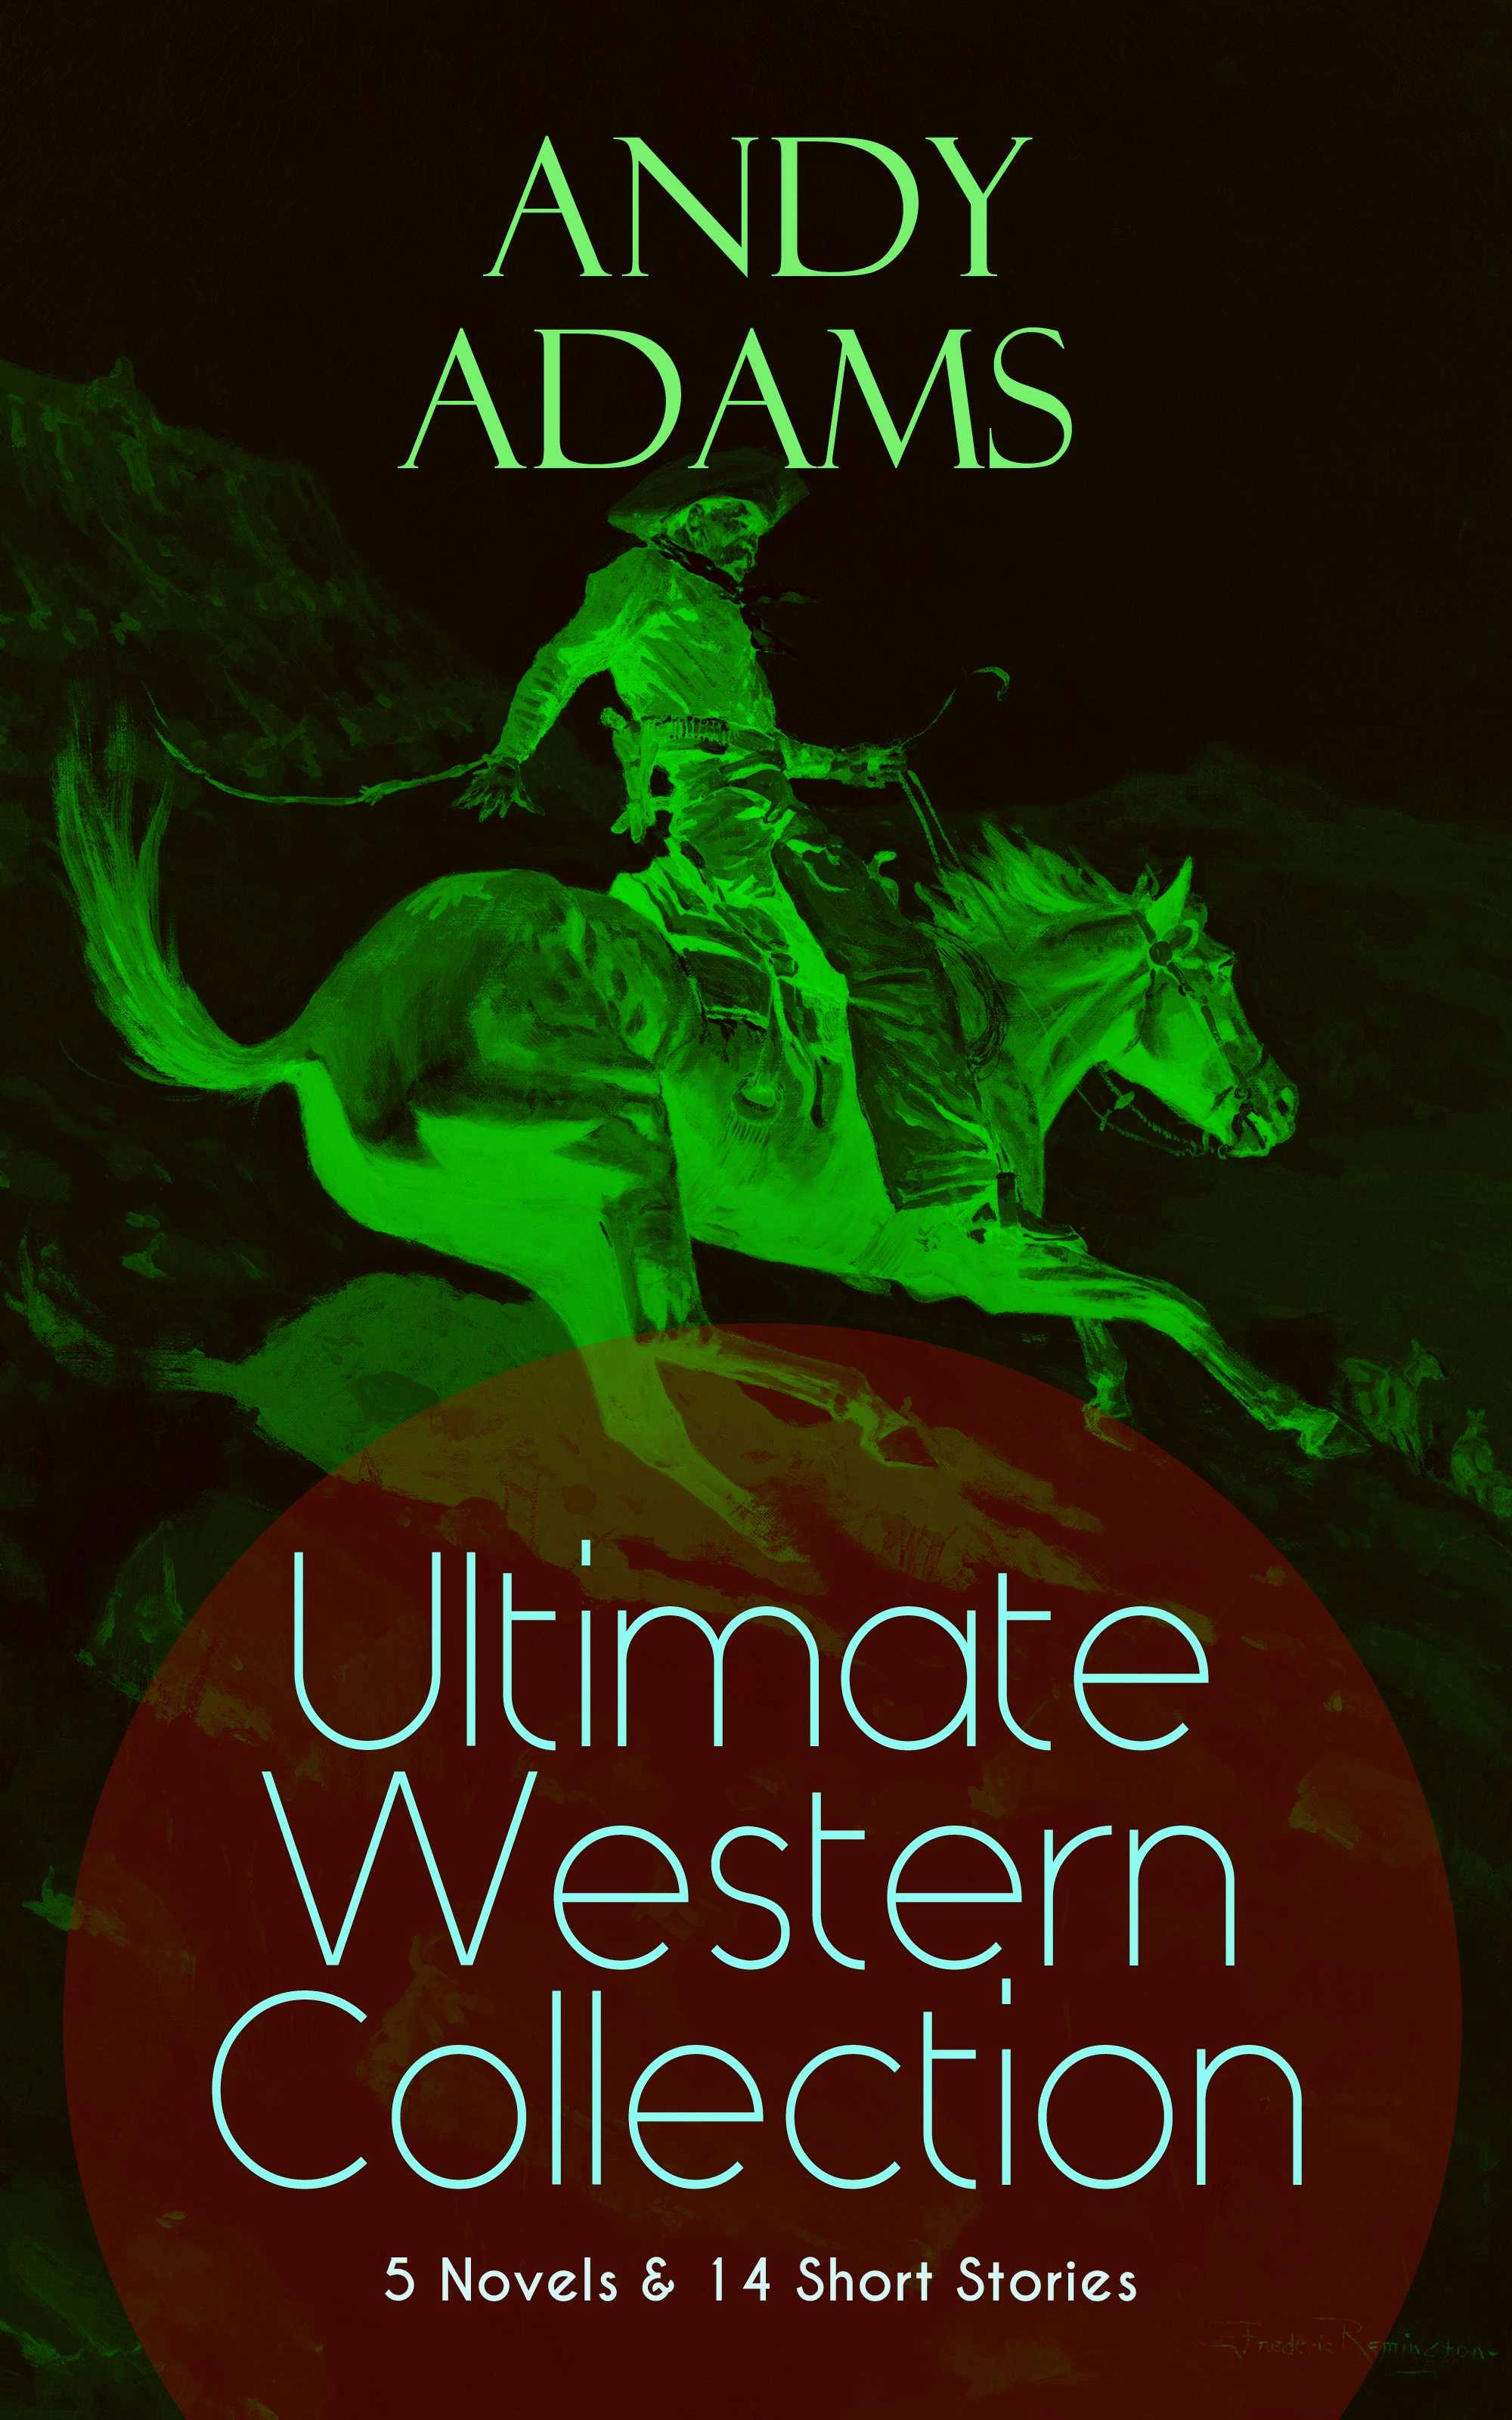 ANDY ADAMS Ultimate Western Collection – 5 Novels & 14 Short Stories: The Story of a Poker Steer, The Log of a Cowboy, A College Vagabond, The Outlet, Reed Anthony, Cowman, The Wells Brothers, The Double Trail, Rangering, A Texas Matchmaker and many more - Andy Adams